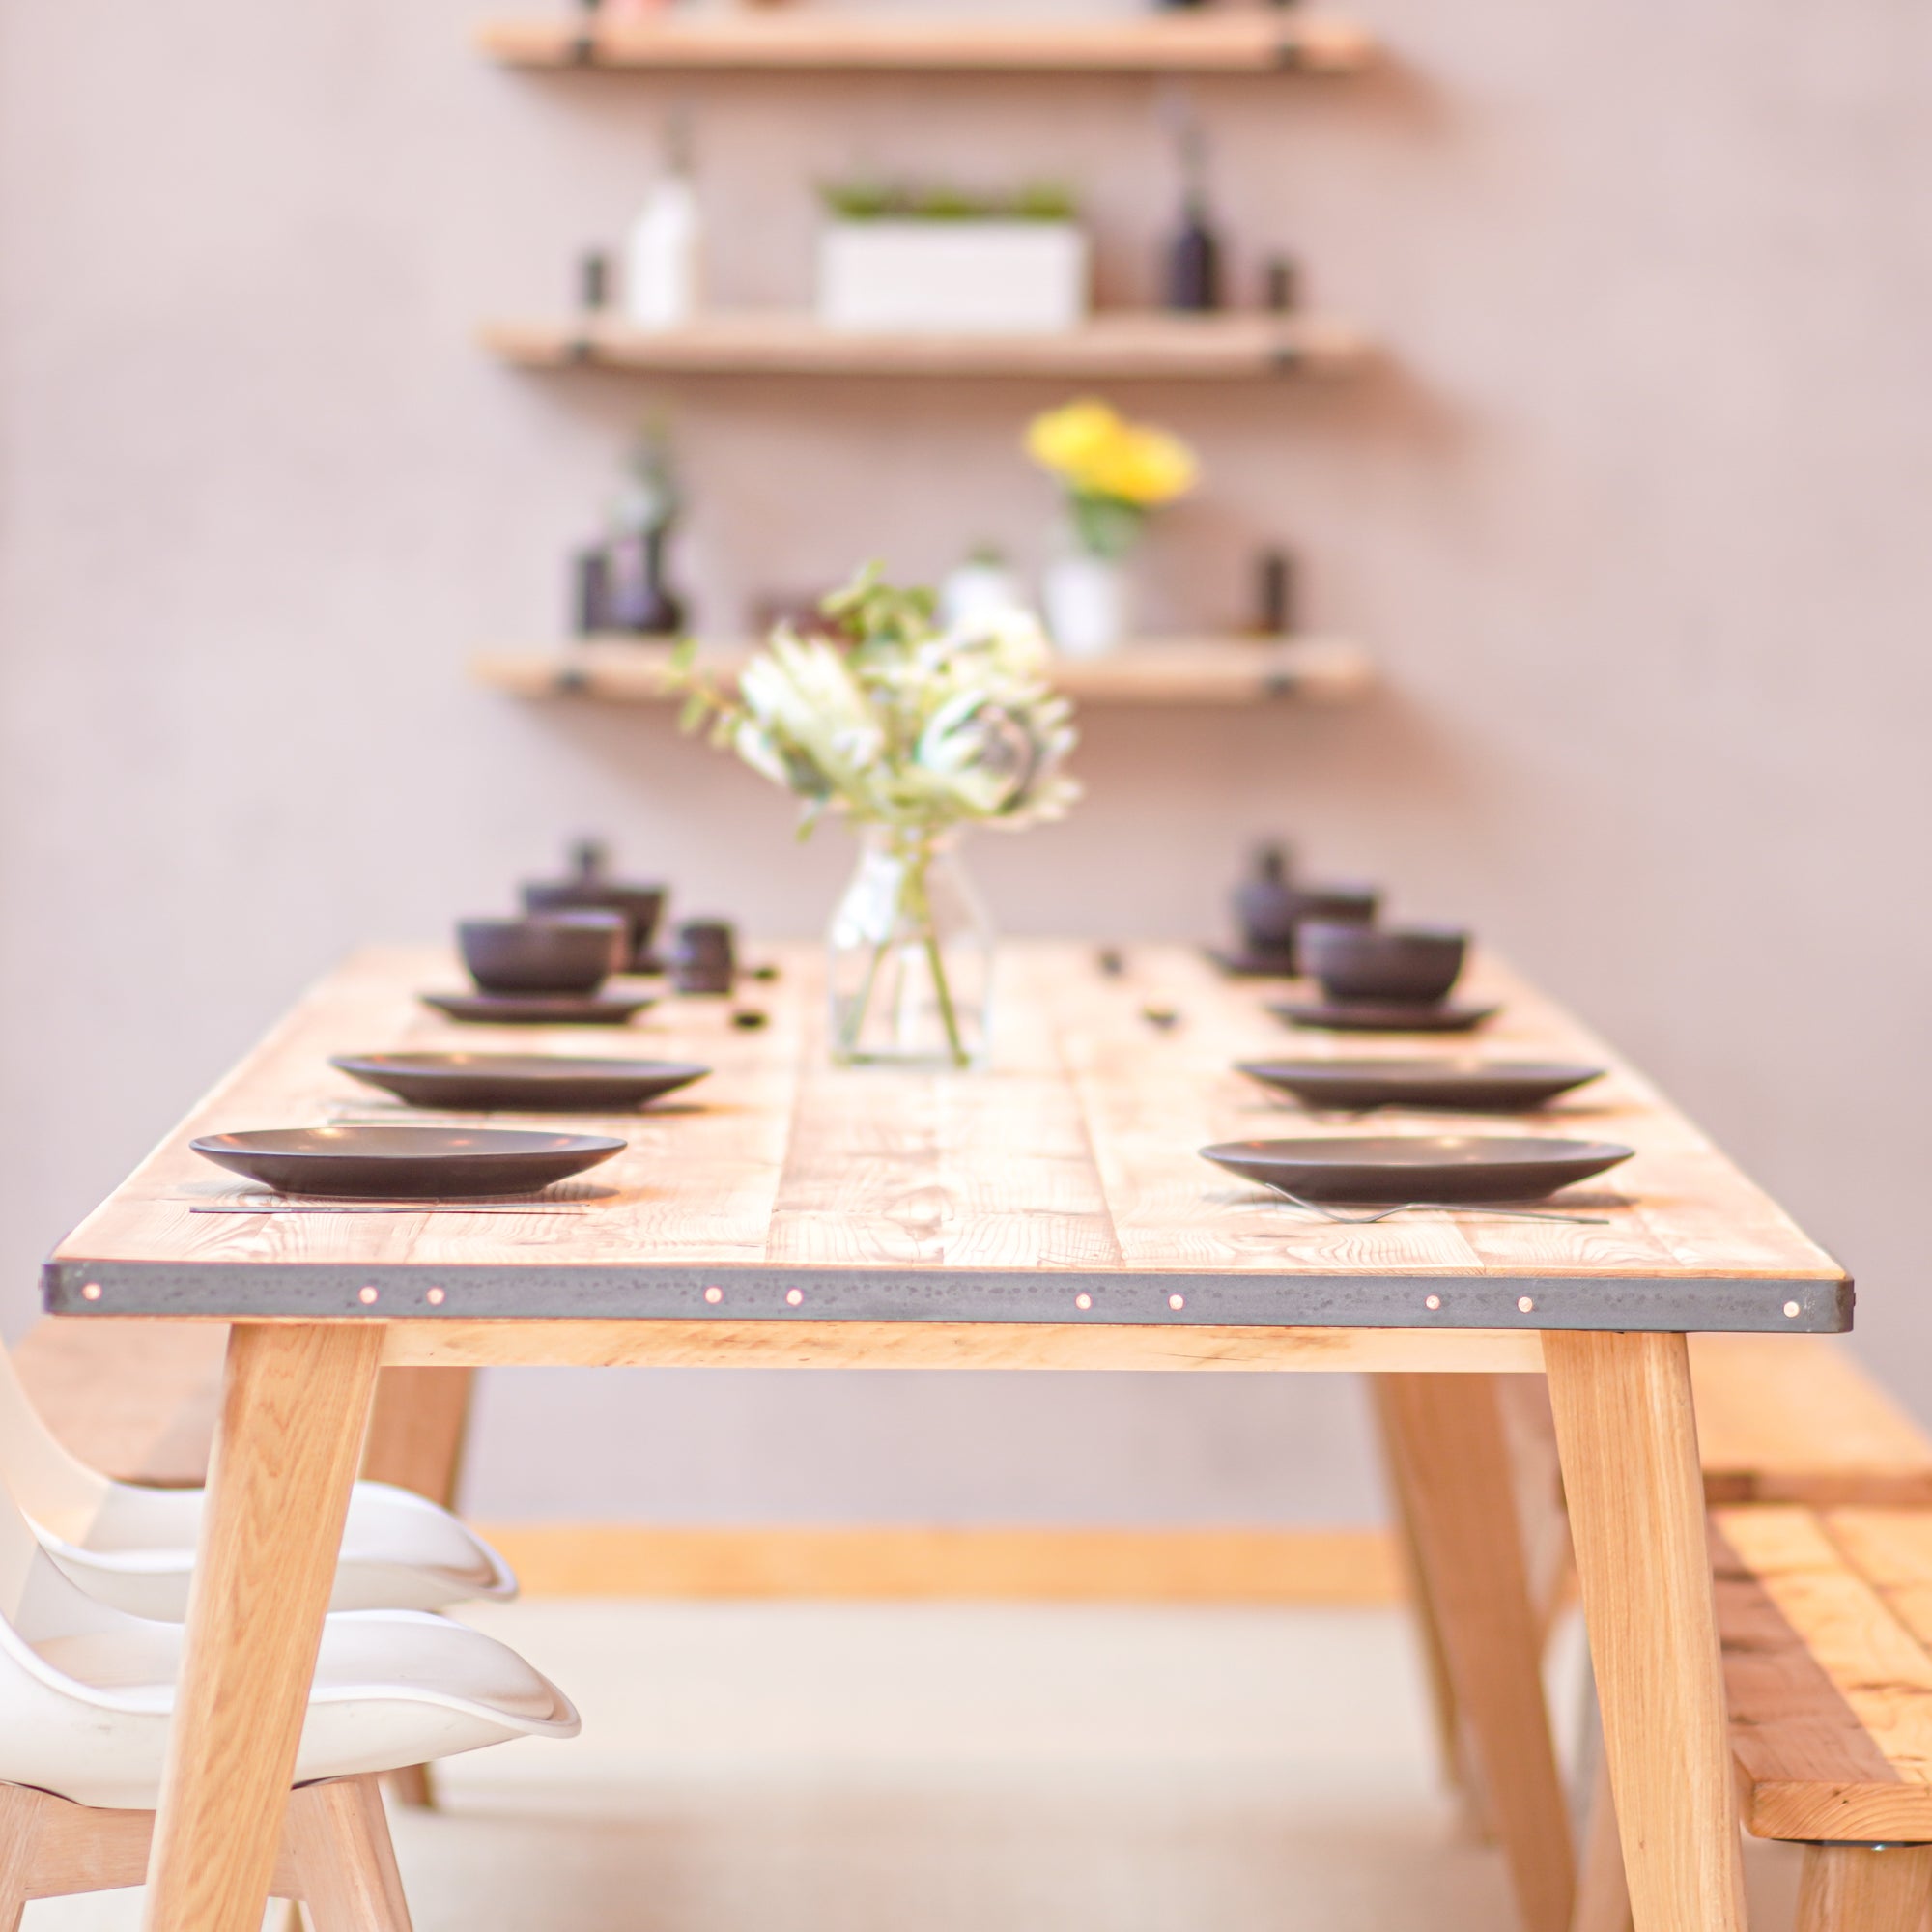 Our Scaffold Board Dining Table